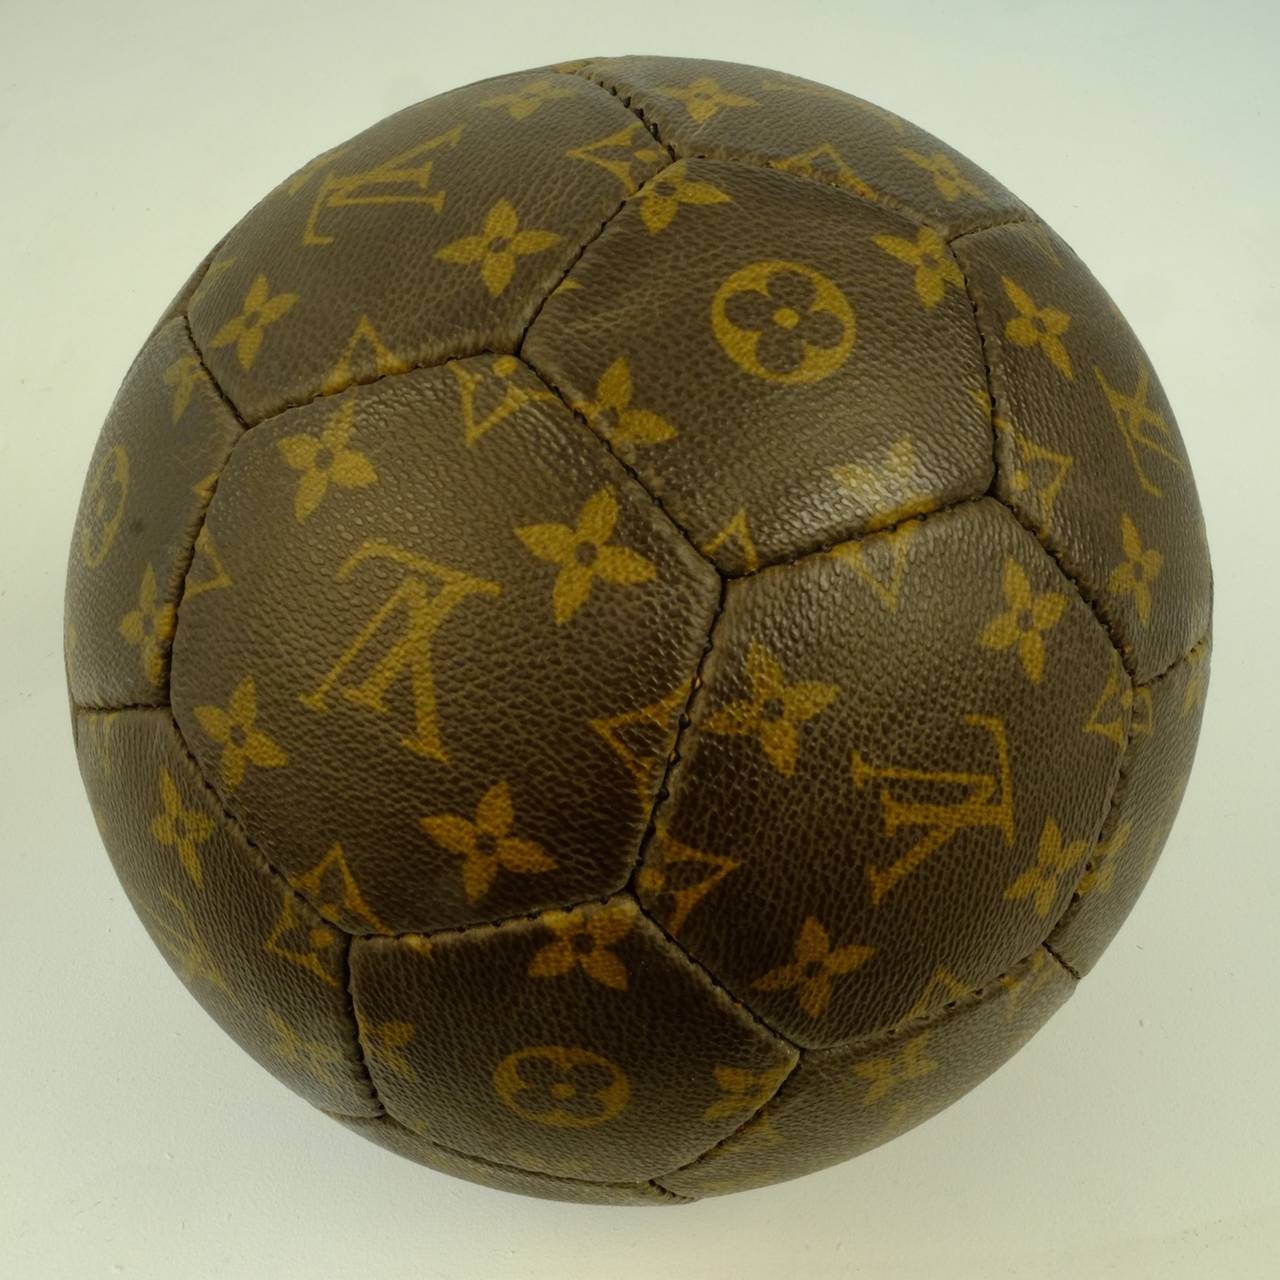 Louis Vuitton Limited Edition Soccer Ball World Cup 1998 at 1stdibs